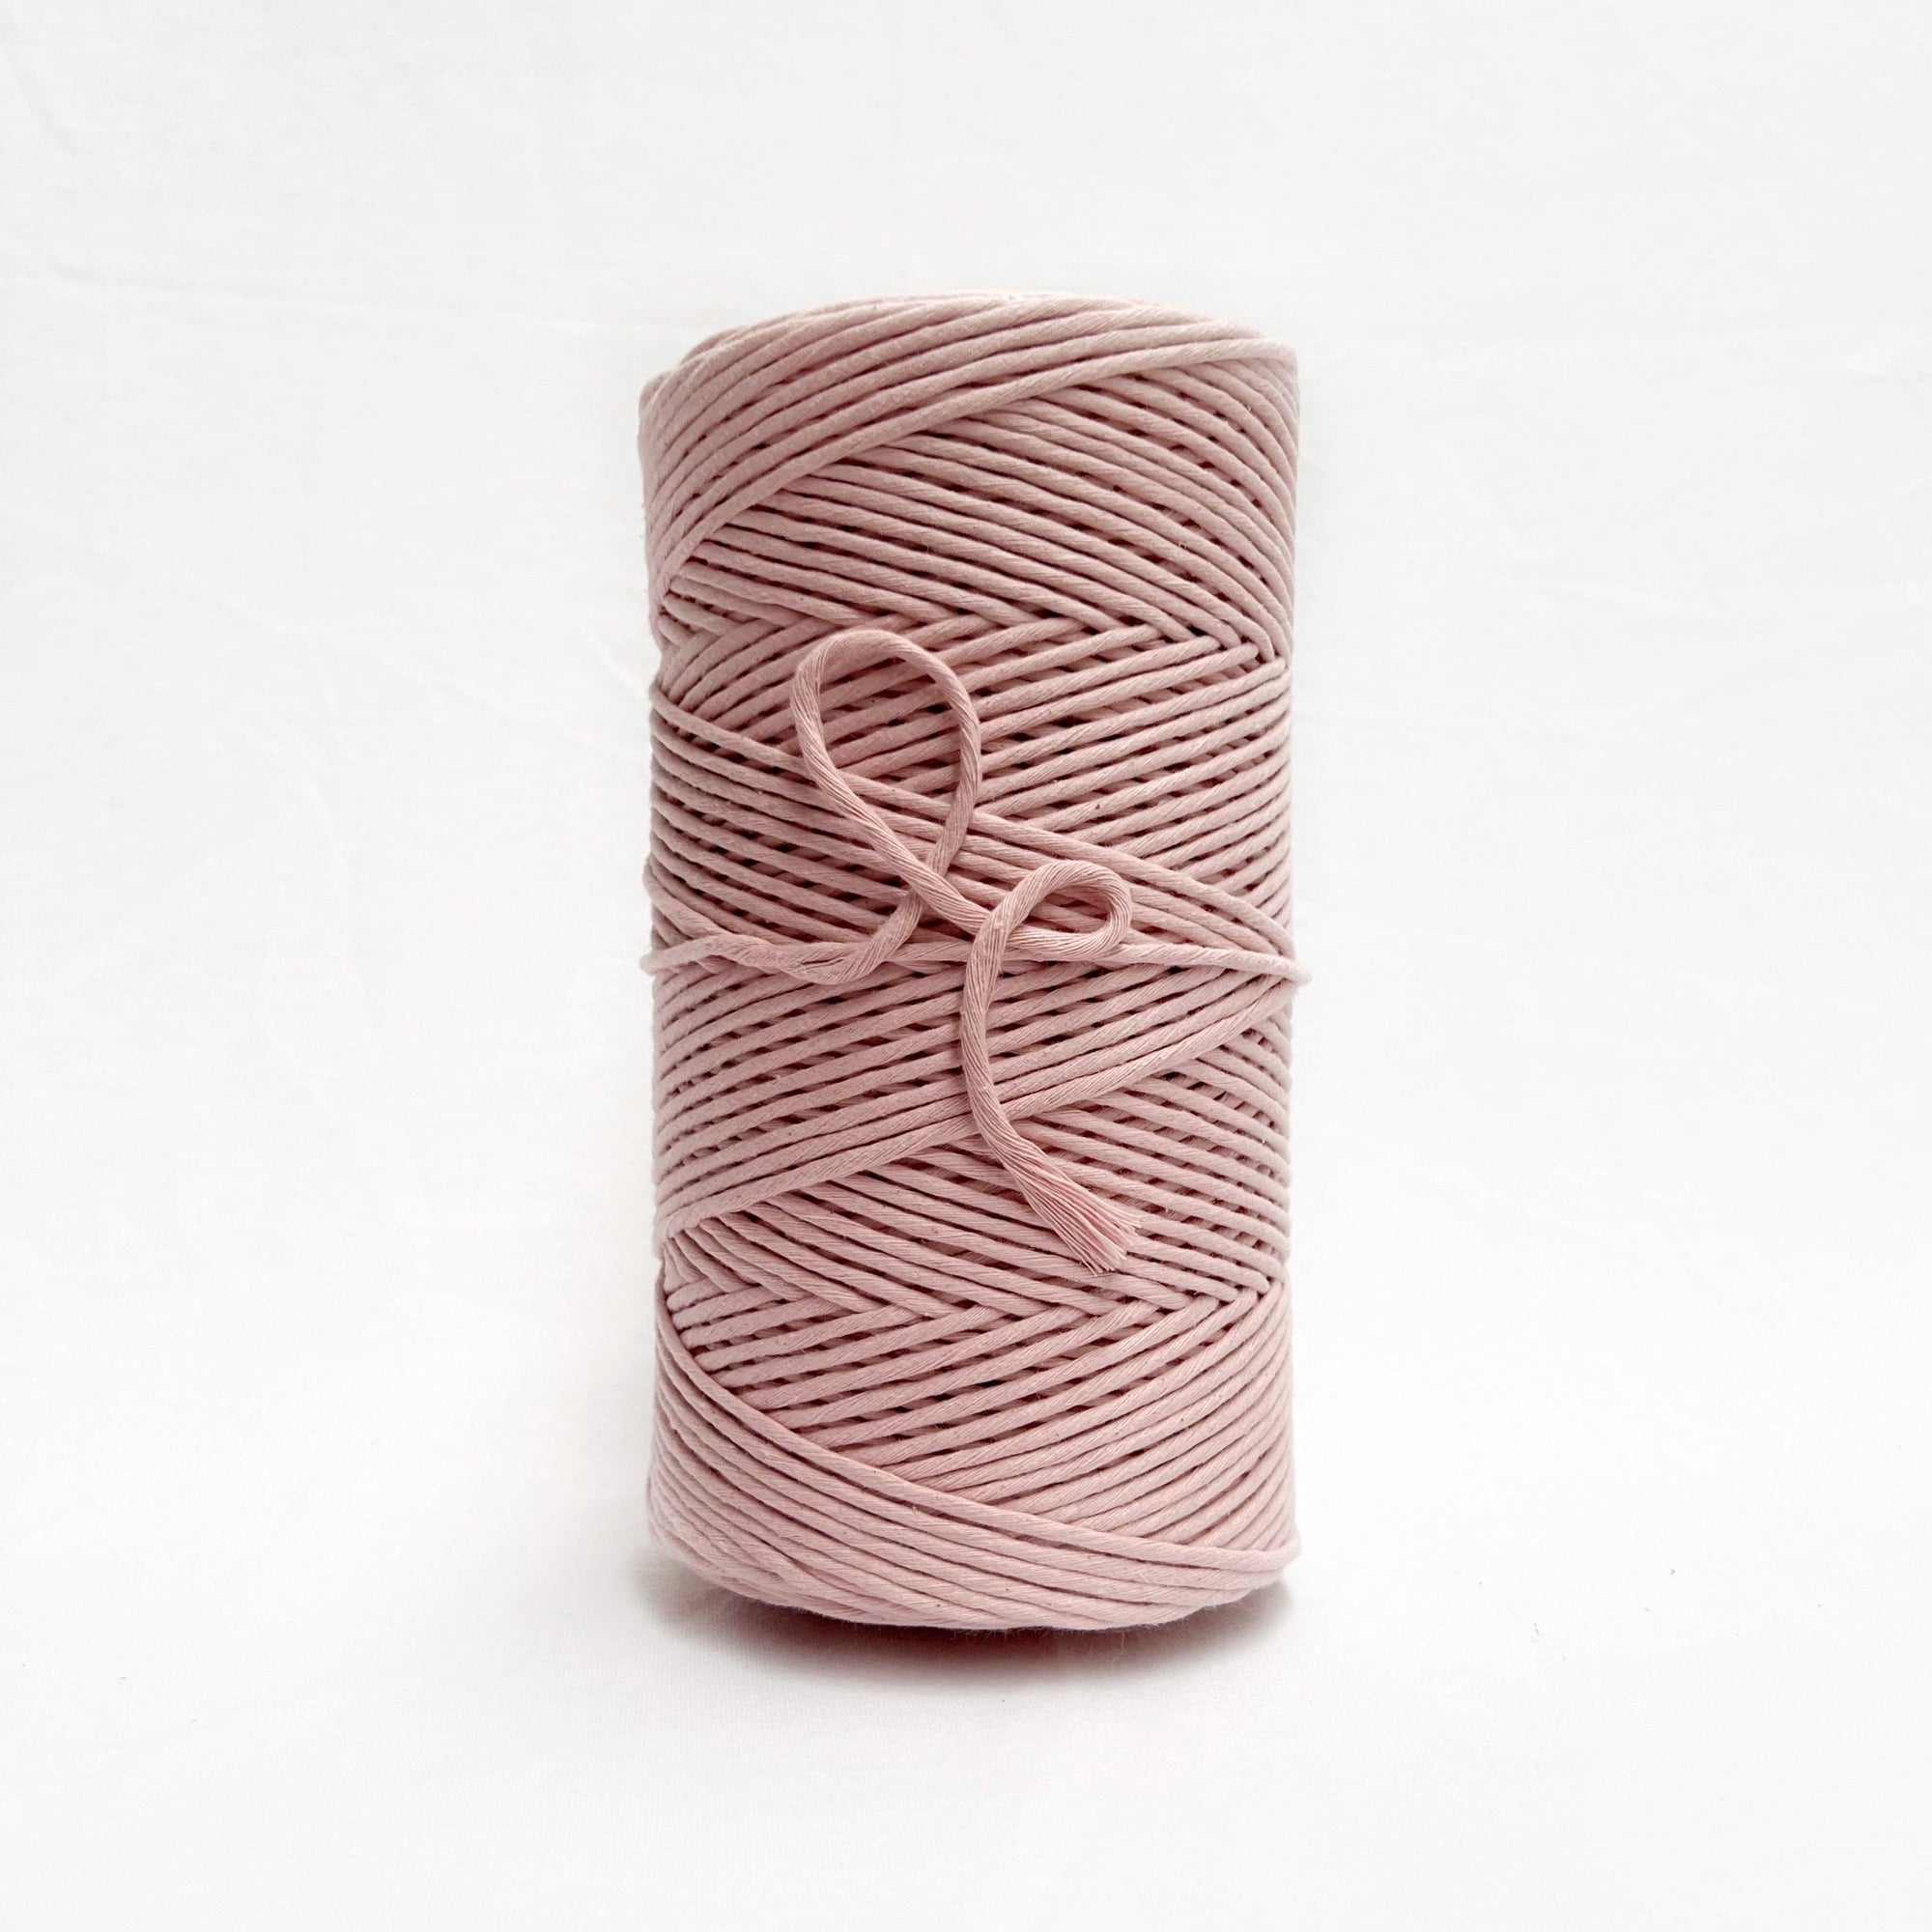 mary maker studio 1kg 5mm recycled cotton macrame string in light pink salt colour suitable for macrame workshops beginners and advanced artists